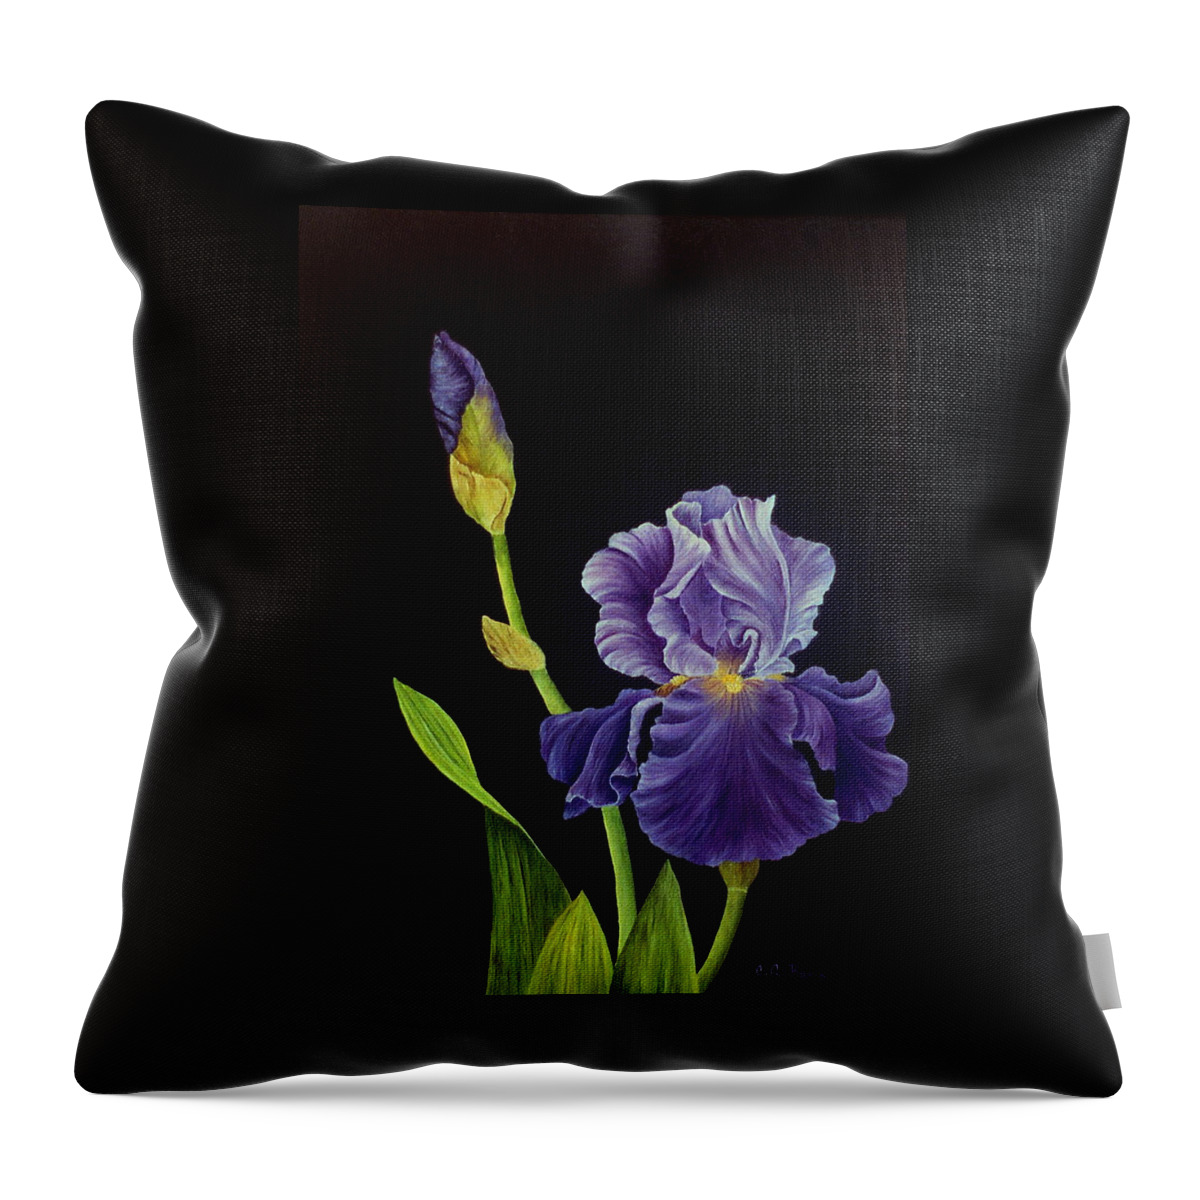 Iris Throw Pillow featuring the painting Iris with Purple Ruffles by Charlotte Bacon